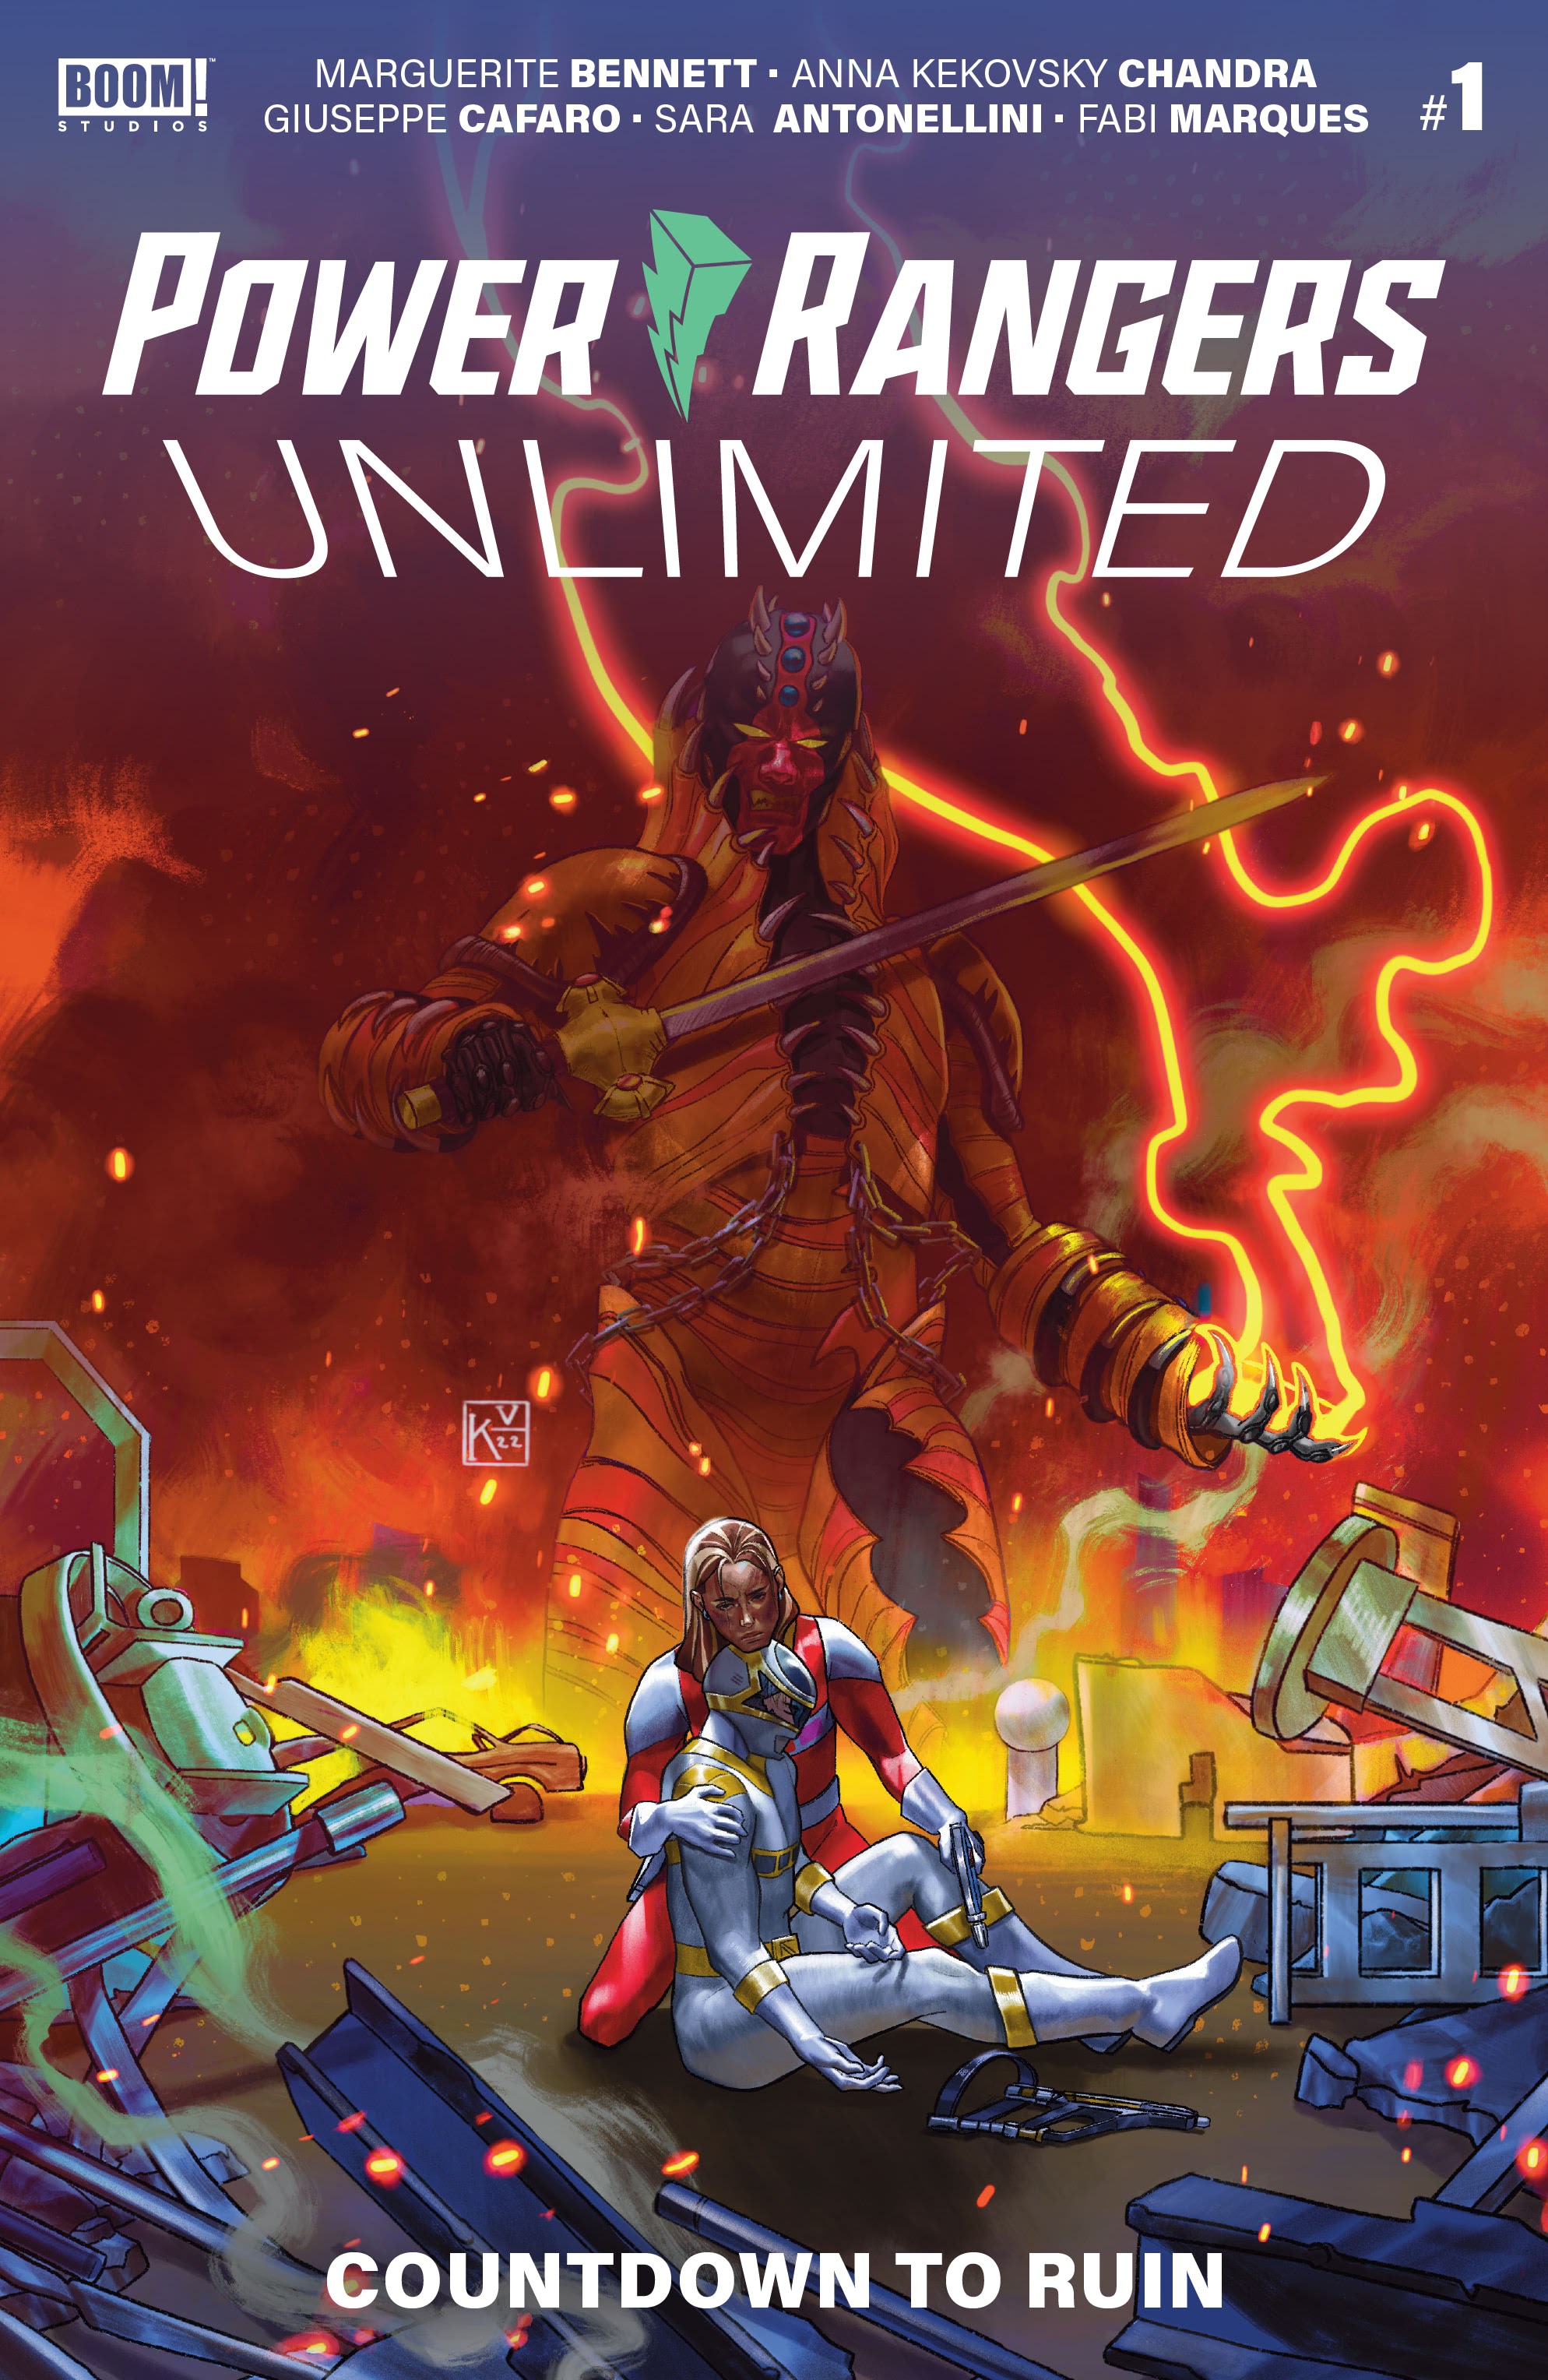 Read online Power Rangers Unlimited comic -  Issue # Countdown to Ruin - 1